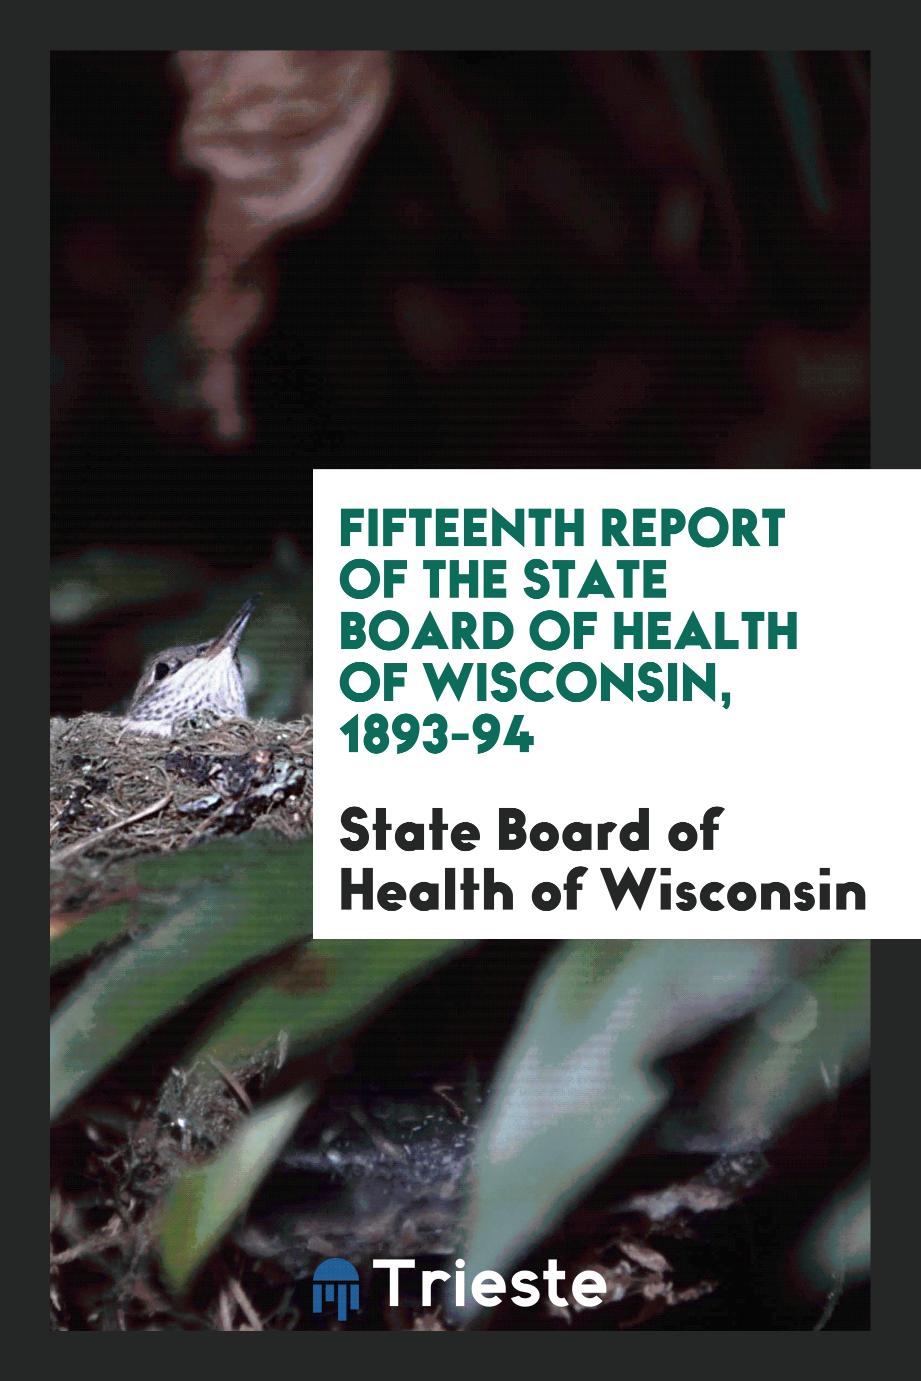 Fifteenth Report of the State Board of Health of Wisconsin, 1893-94